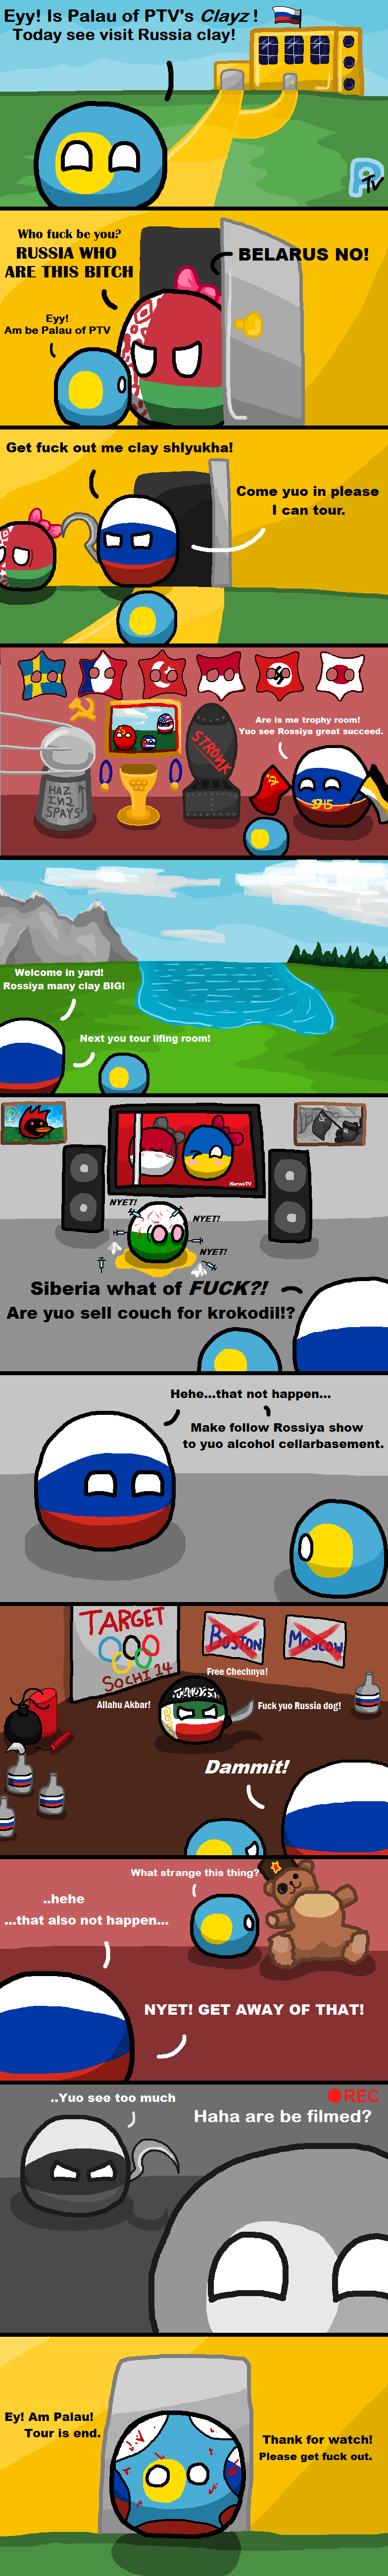 Polandball Comics -Insert+suitable+title+here-.+fuck+you+thats+why....dont+leave+nii_25a28b_4889375